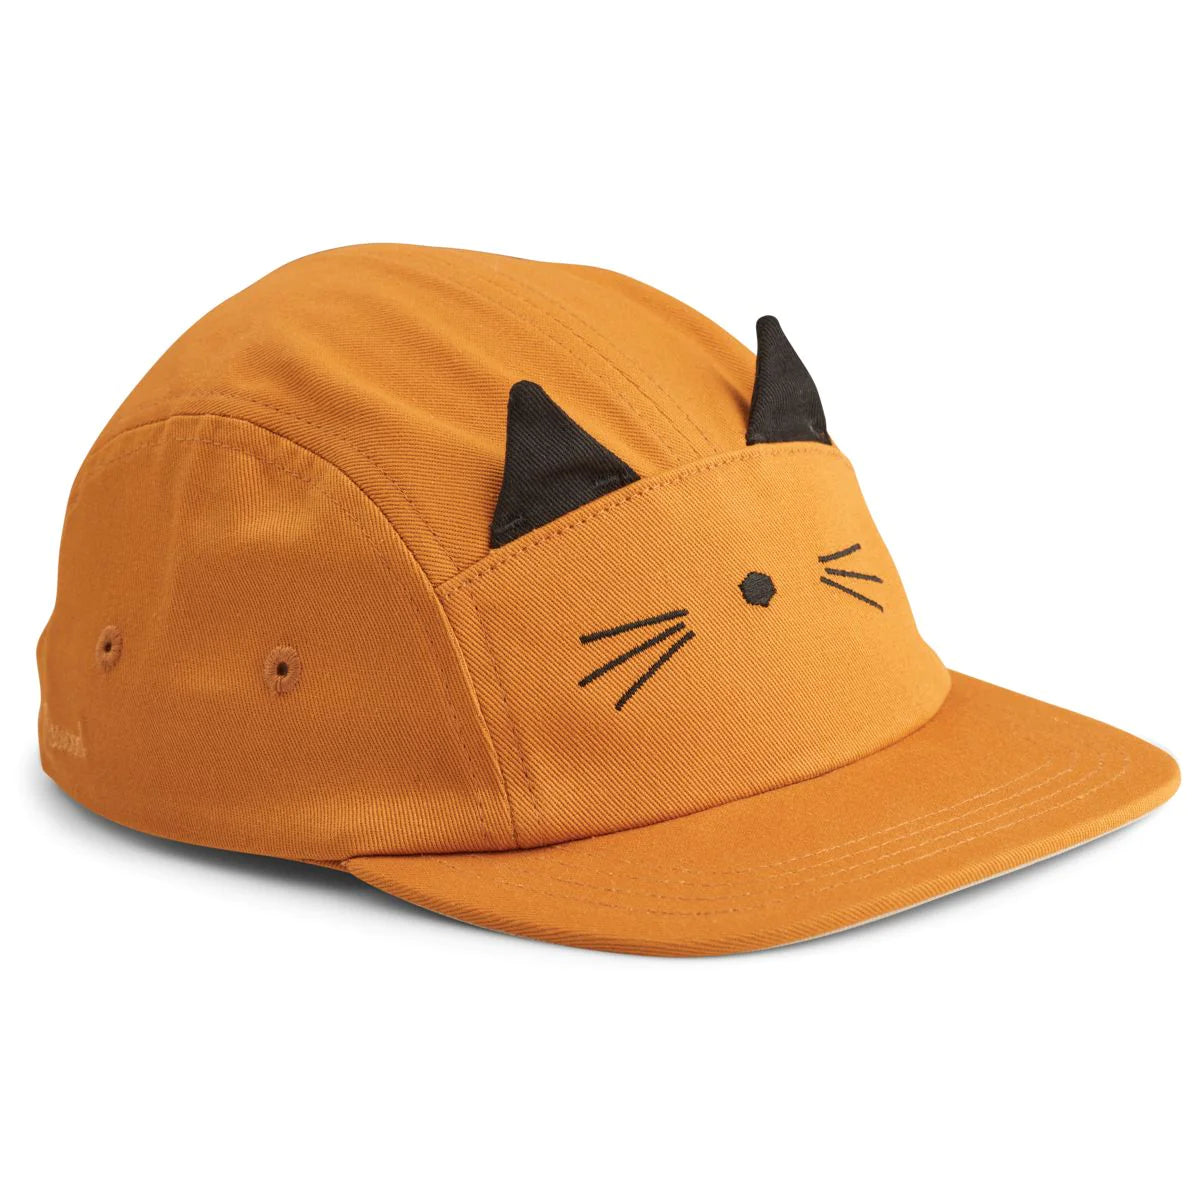 RORY CAT CAP (Available in 2 colors)